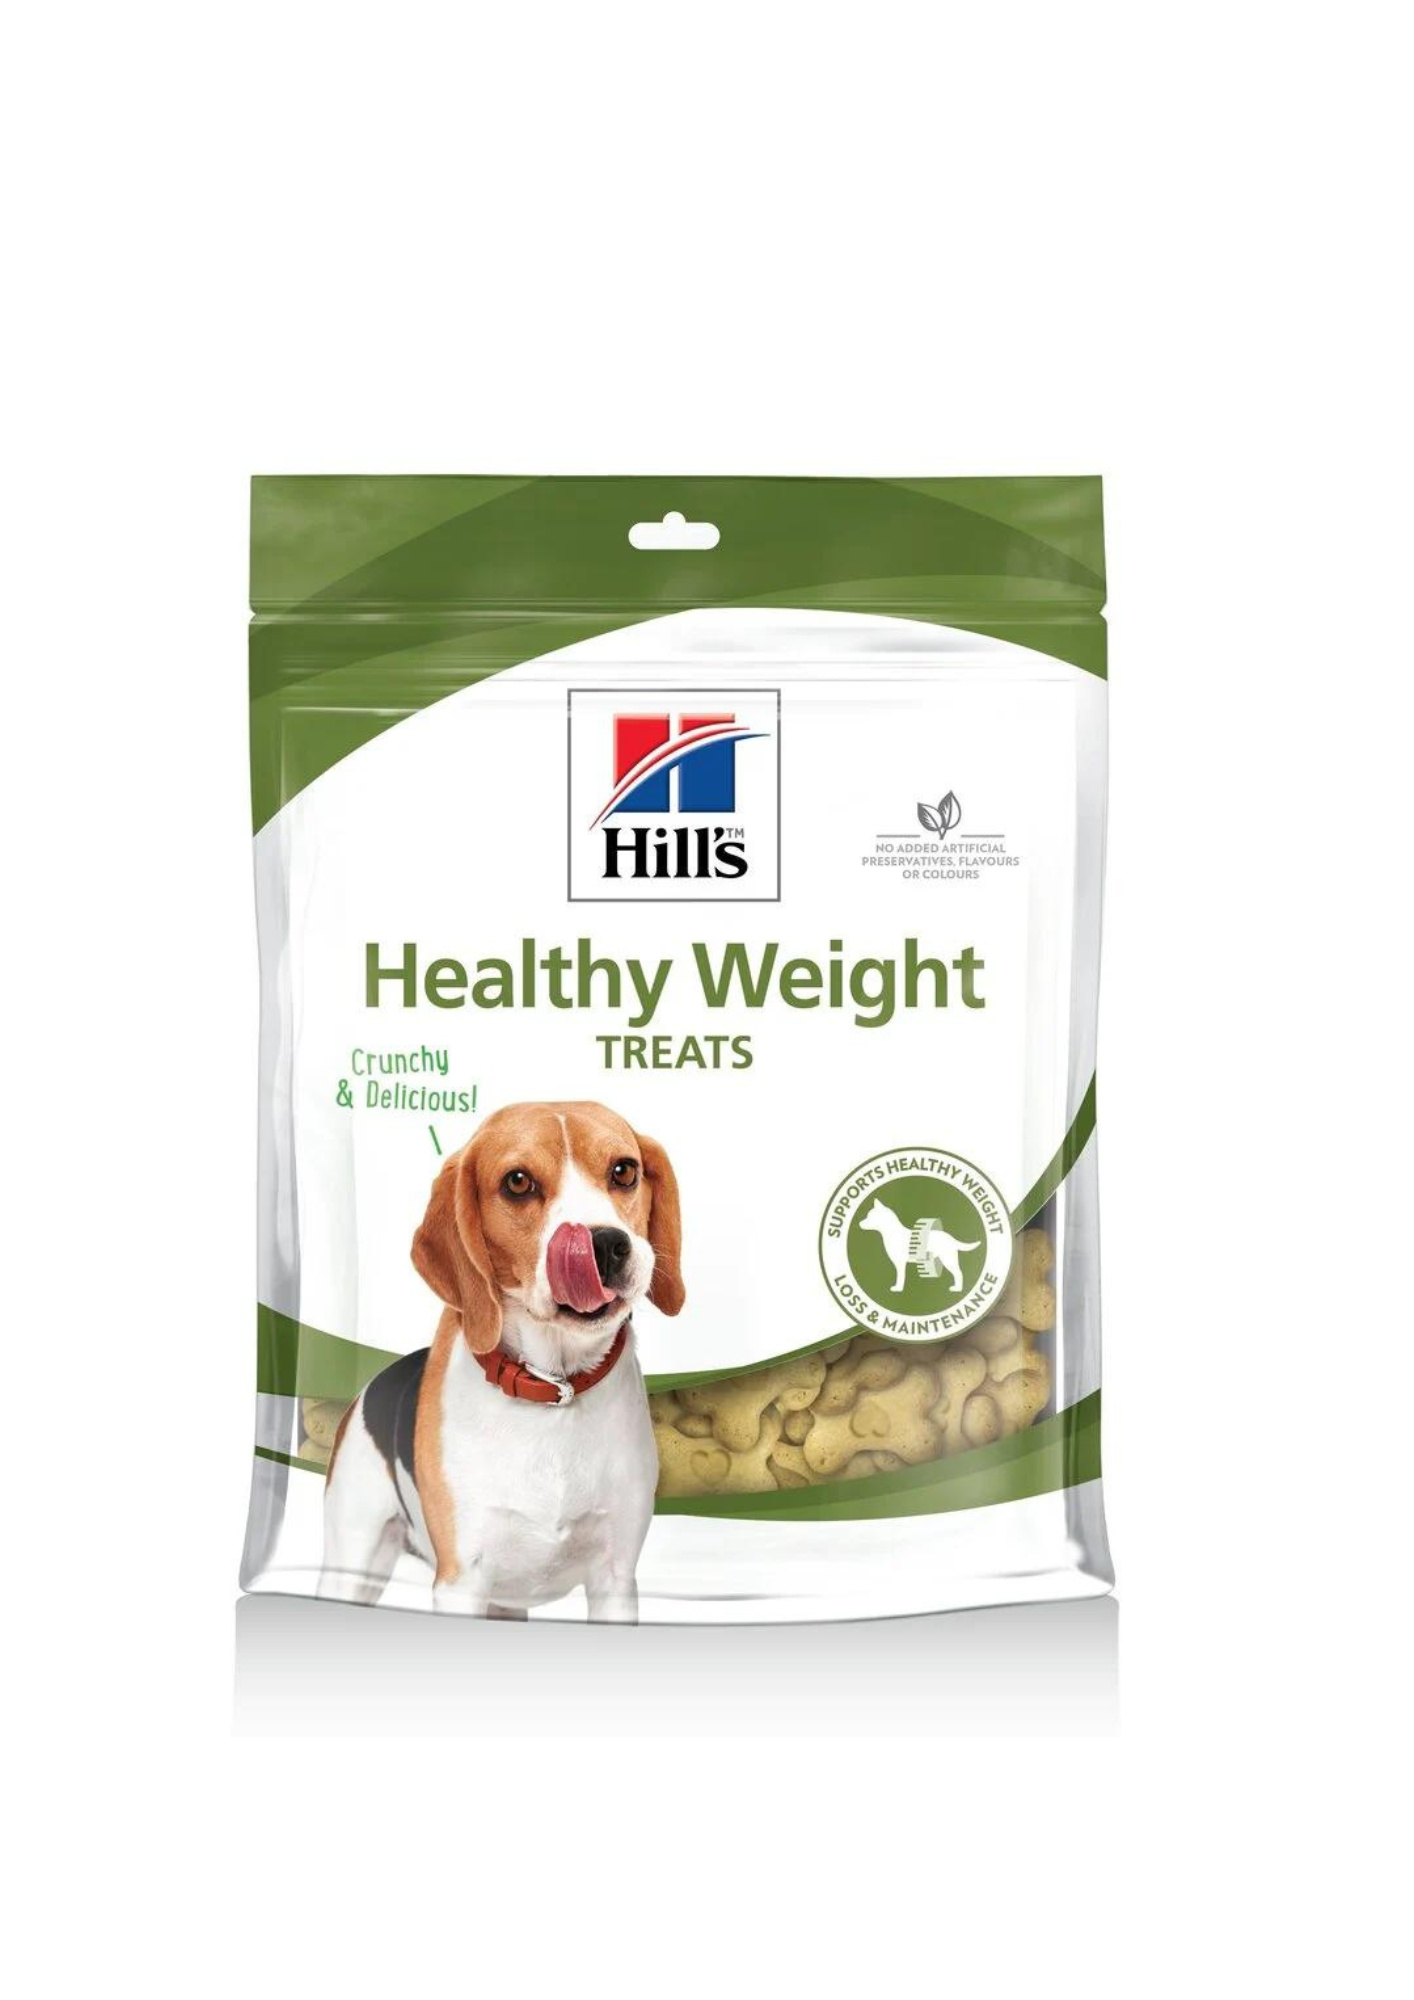 HILL'S HEALTHY WEIGHT Dog Treats, 220g